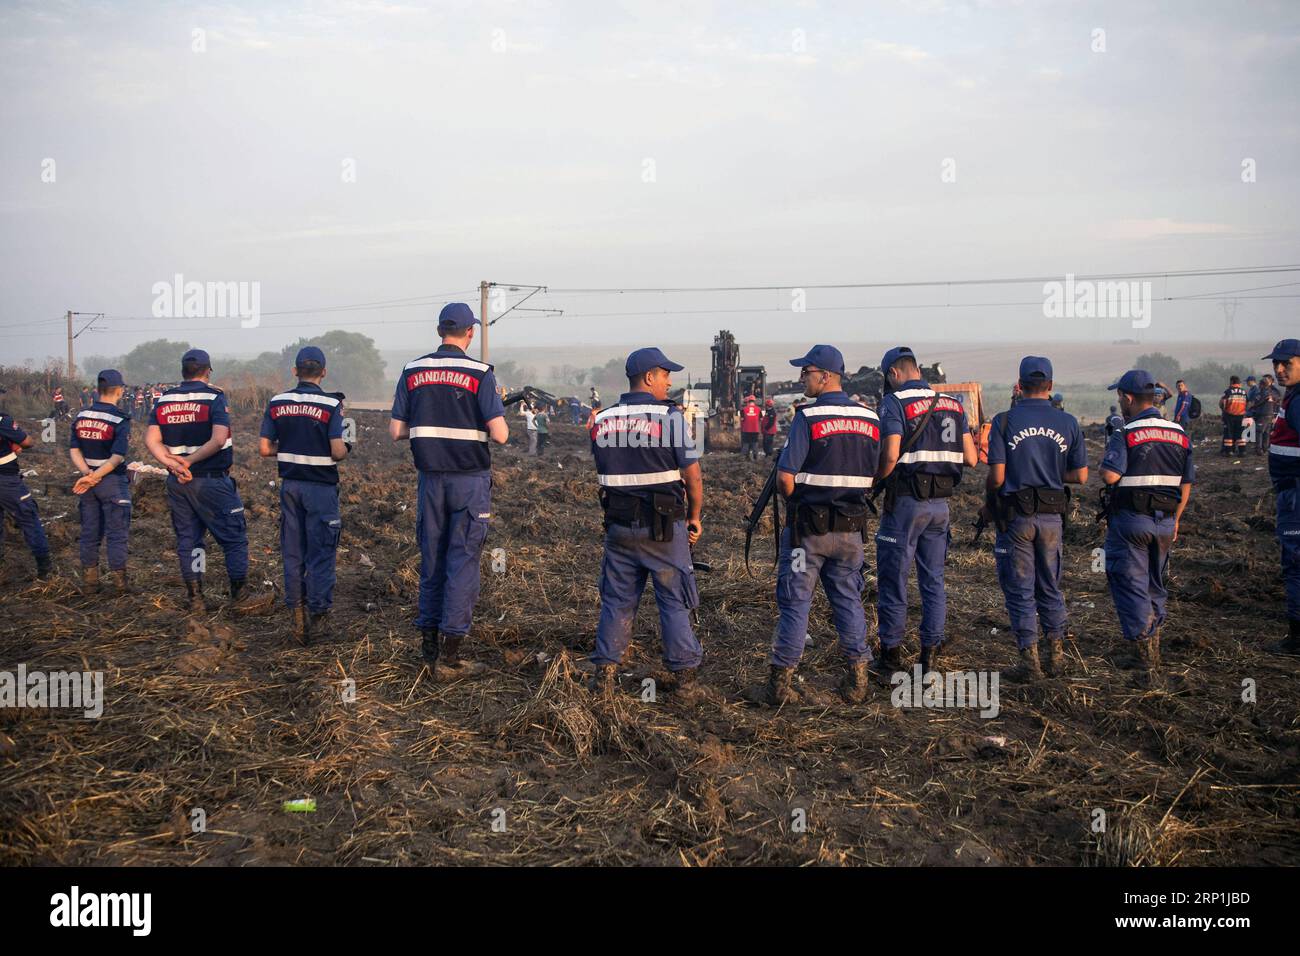 (180709) -- TEKIRDAG, July 9, 2018 () -- Gendarmerie are seen on guard at the site of a train derailment in Tekirdag, Turkey, July 9, 2018. The death toll from a train derailment that occurred Sunday in northwestern Turkey has risen to 24, the state-run news agency Anadolu quoted Deputy Prime Minister Recep Akdag as saying. () (djj) TURKEY-TEKIRDAG-TRAIN-DERAILMENT Xinhua PUBLICATIONxNOTxINxCHN Stock Photo